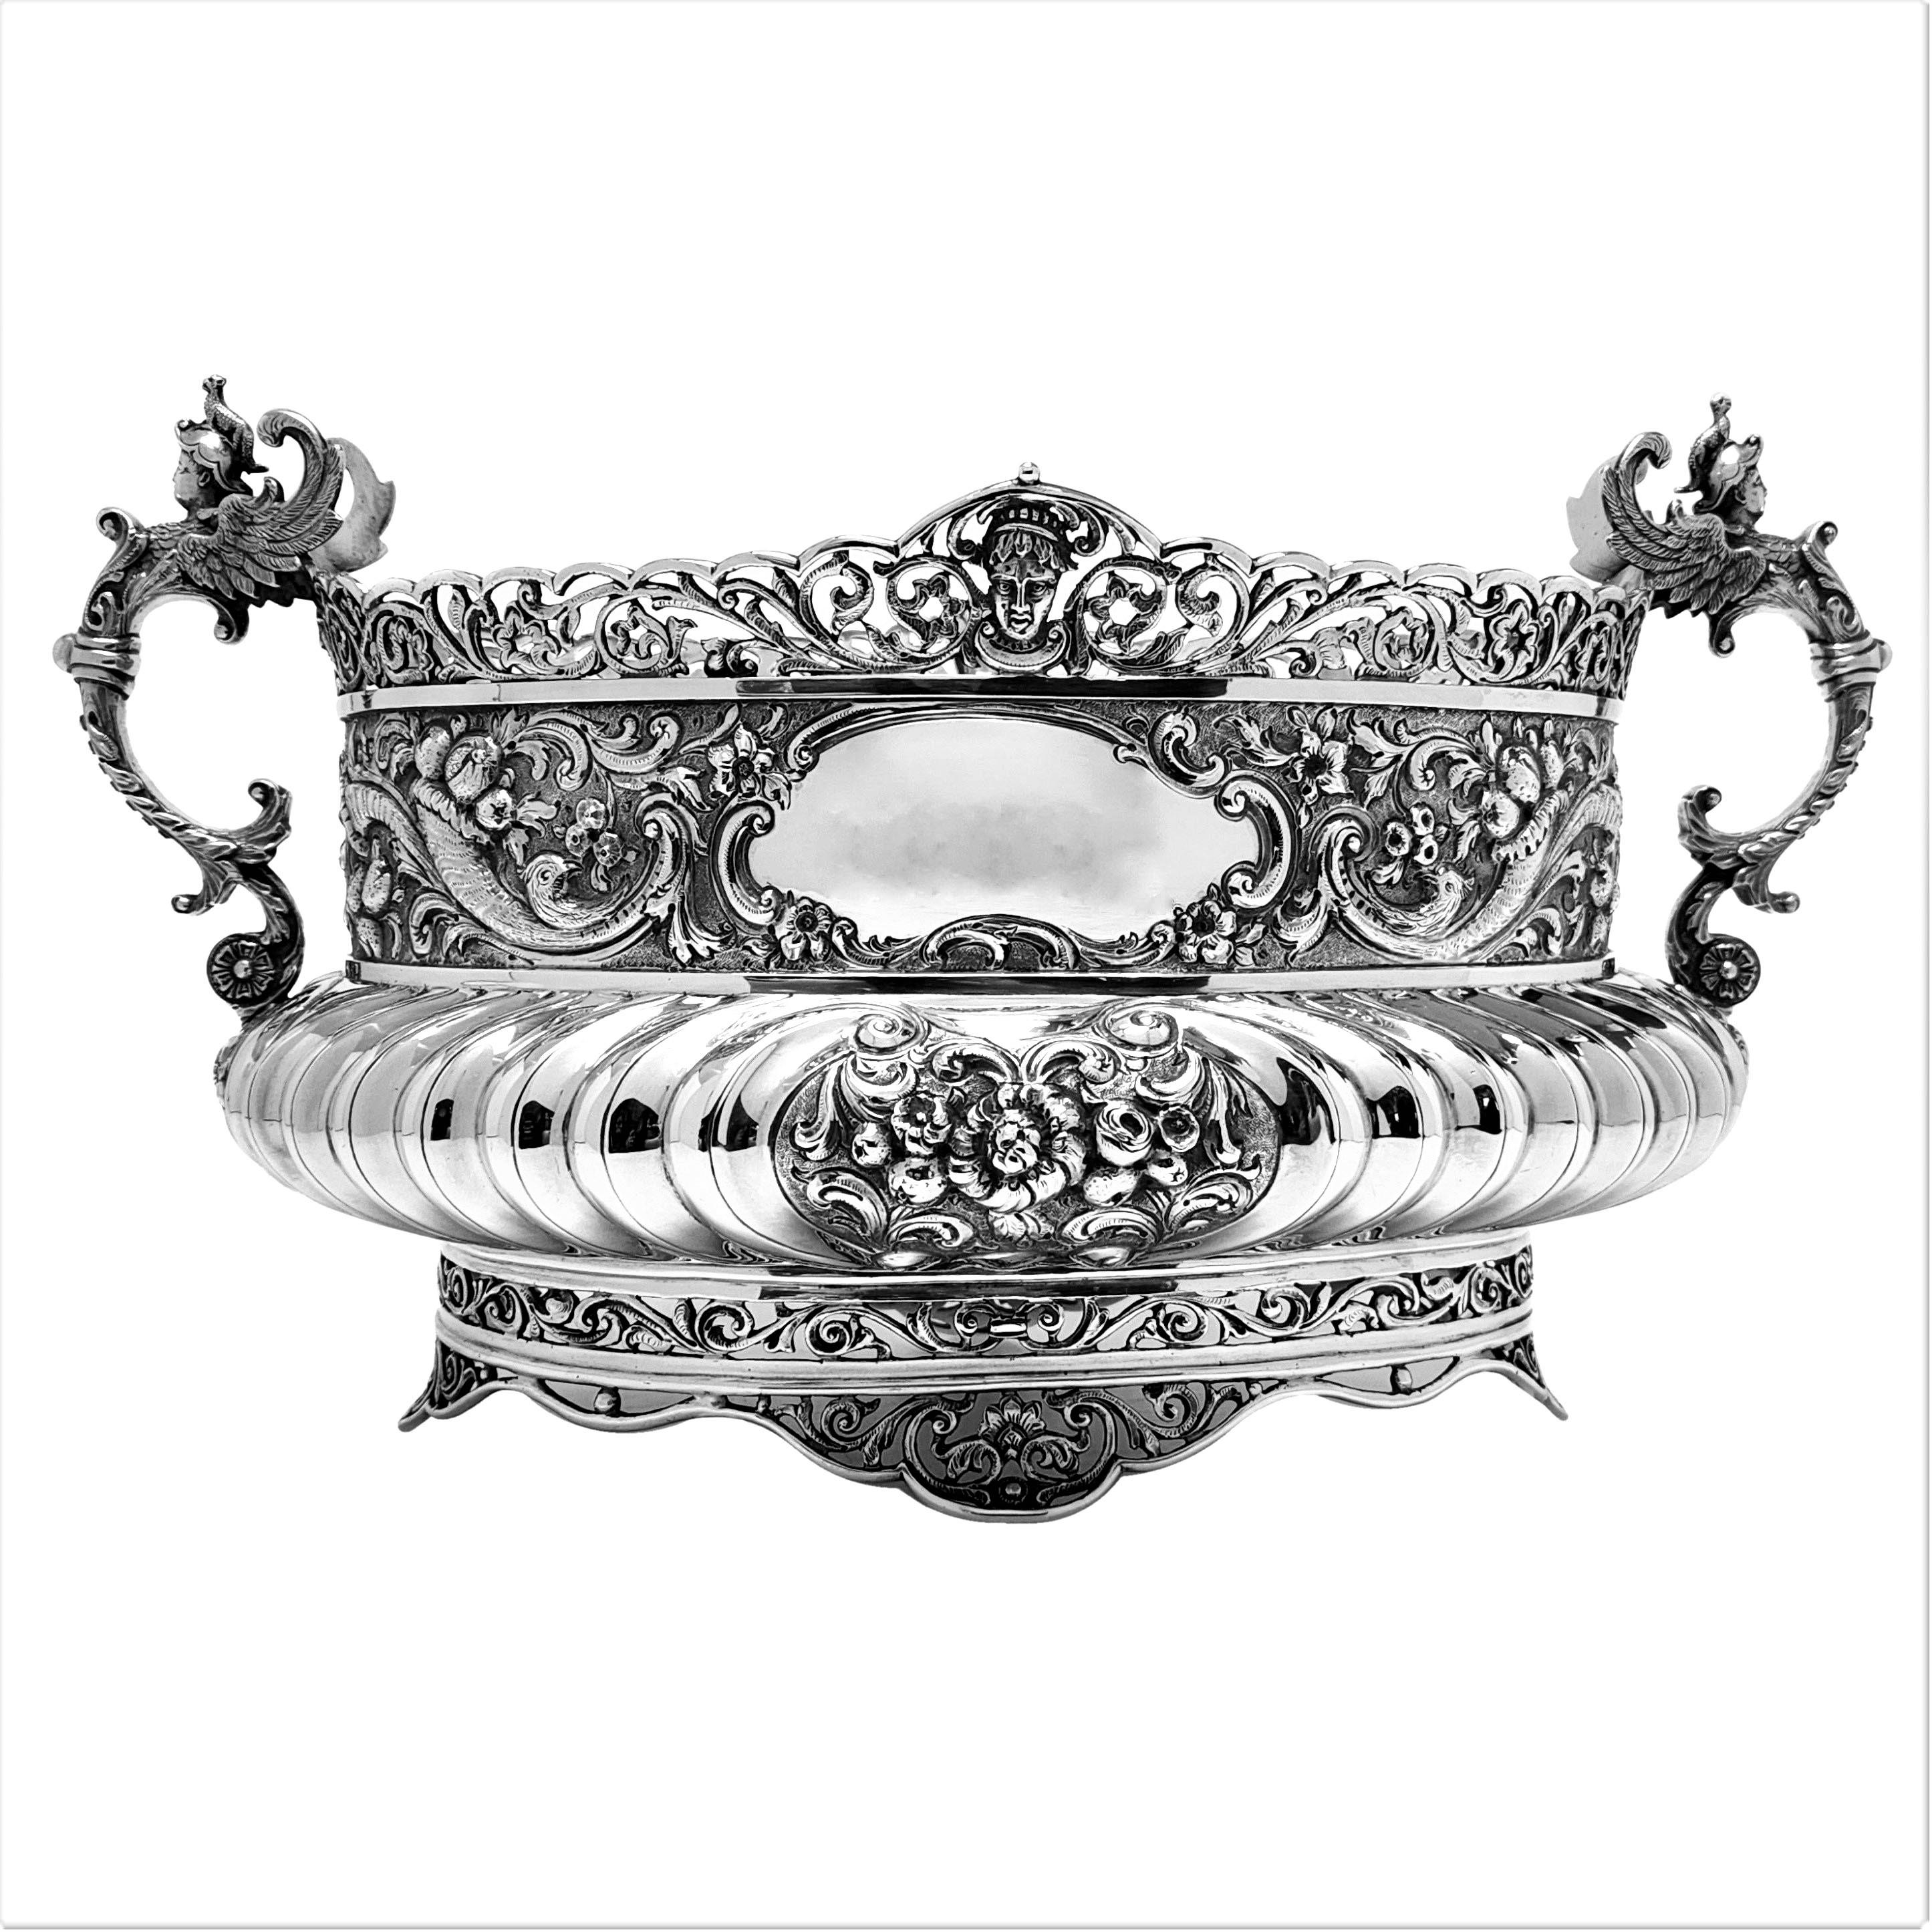 English Antique Victorian Silver Bowl Centrepiece on Plinth 1898 Champagne Wine Cooler